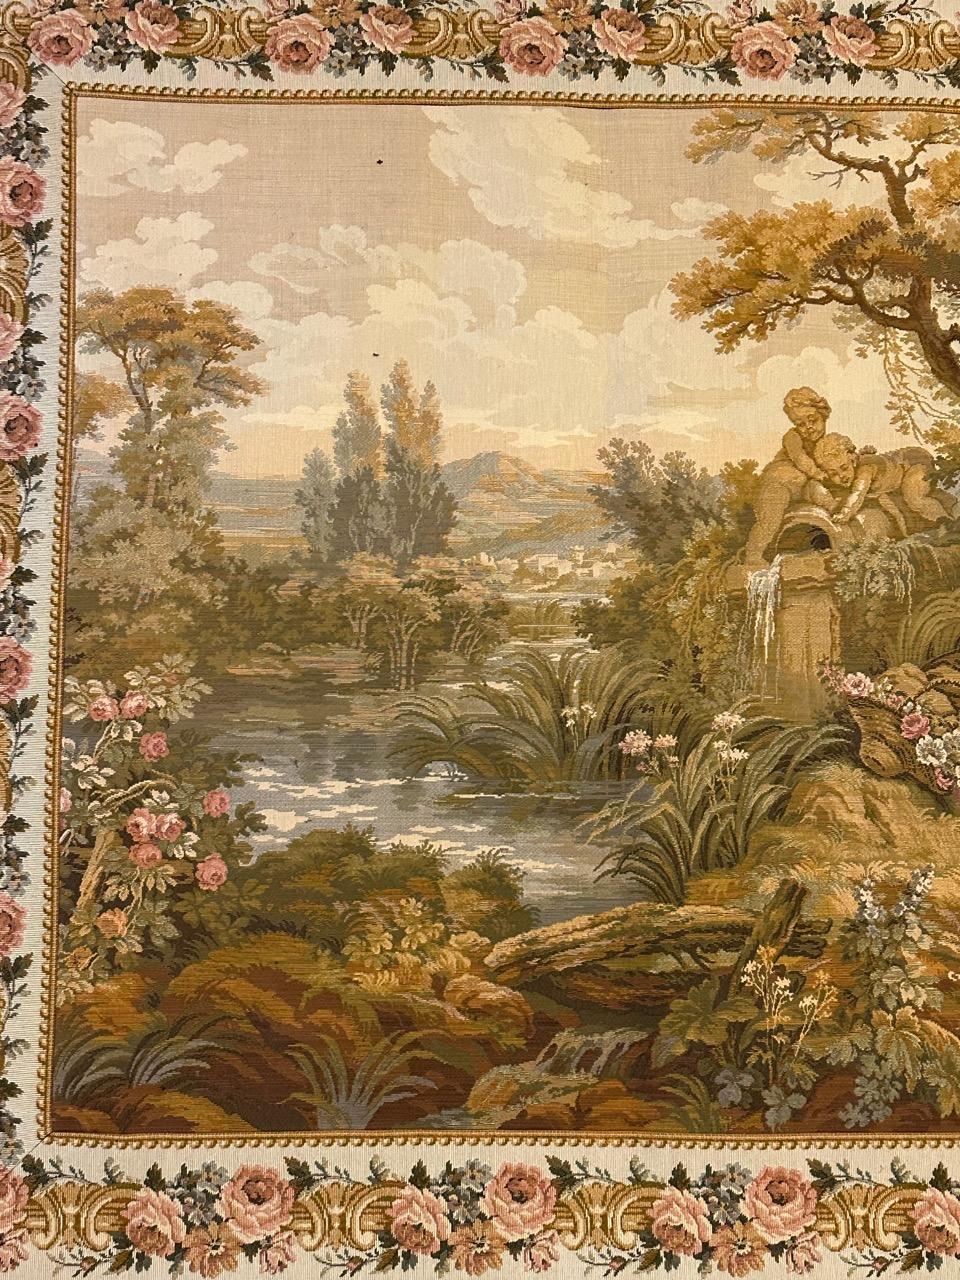 Beautiful French Jaquar Aubusson style tapestry, with nice romantic design and beautiful colors, mechanical Jaquar fabric with wool woven.

✨✨✨
